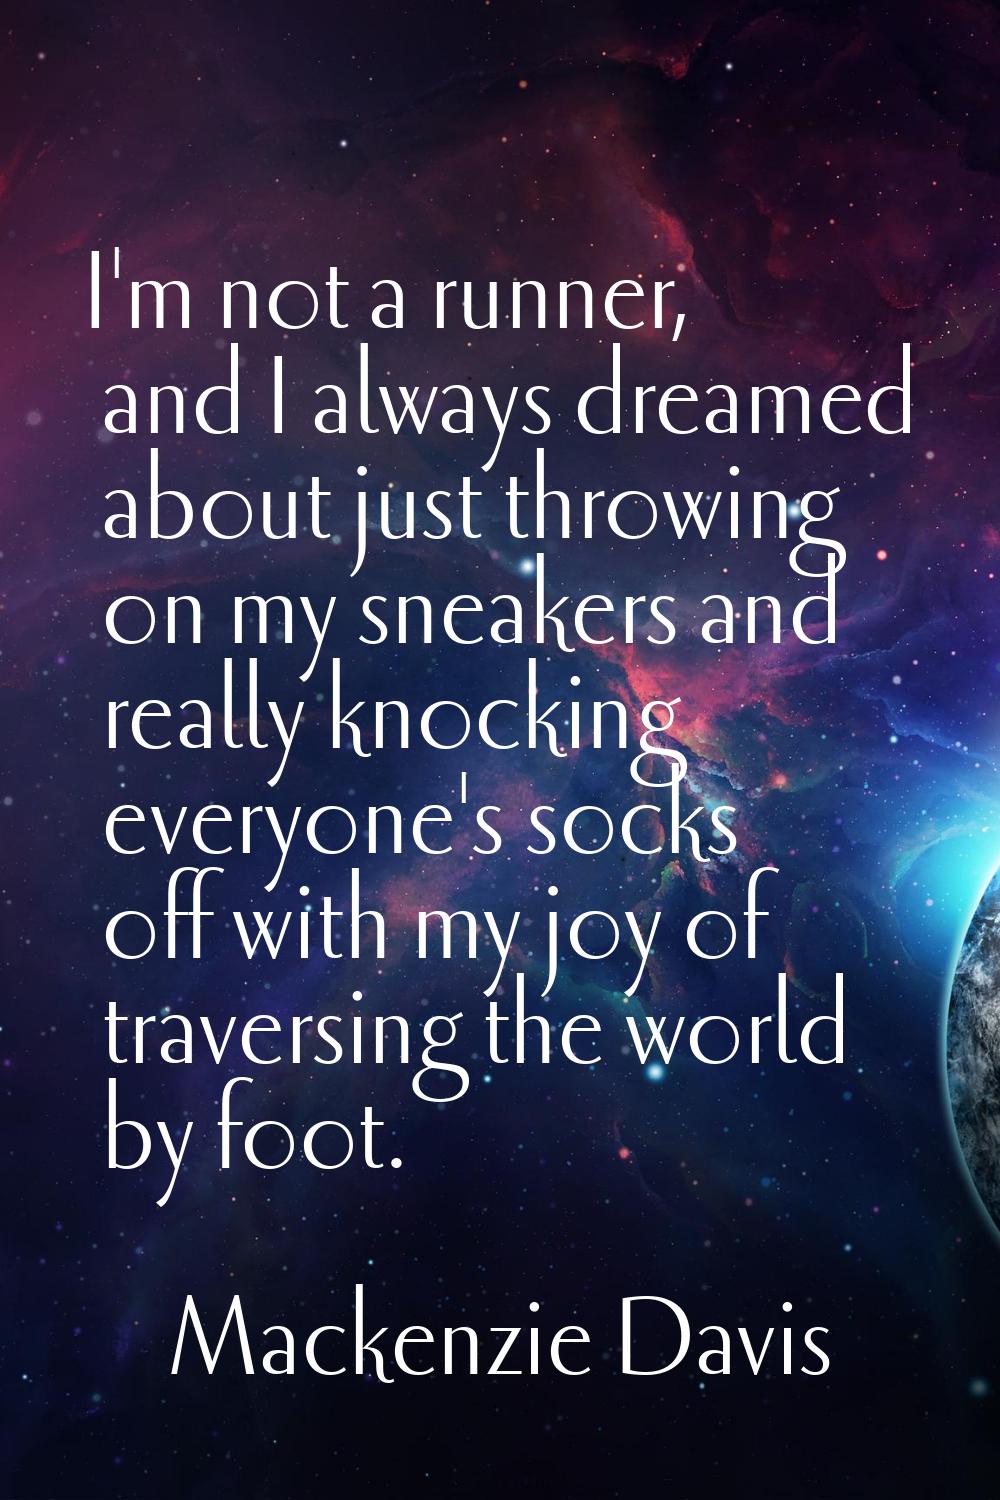 I'm not a runner, and I always dreamed about just throwing on my sneakers and really knocking every